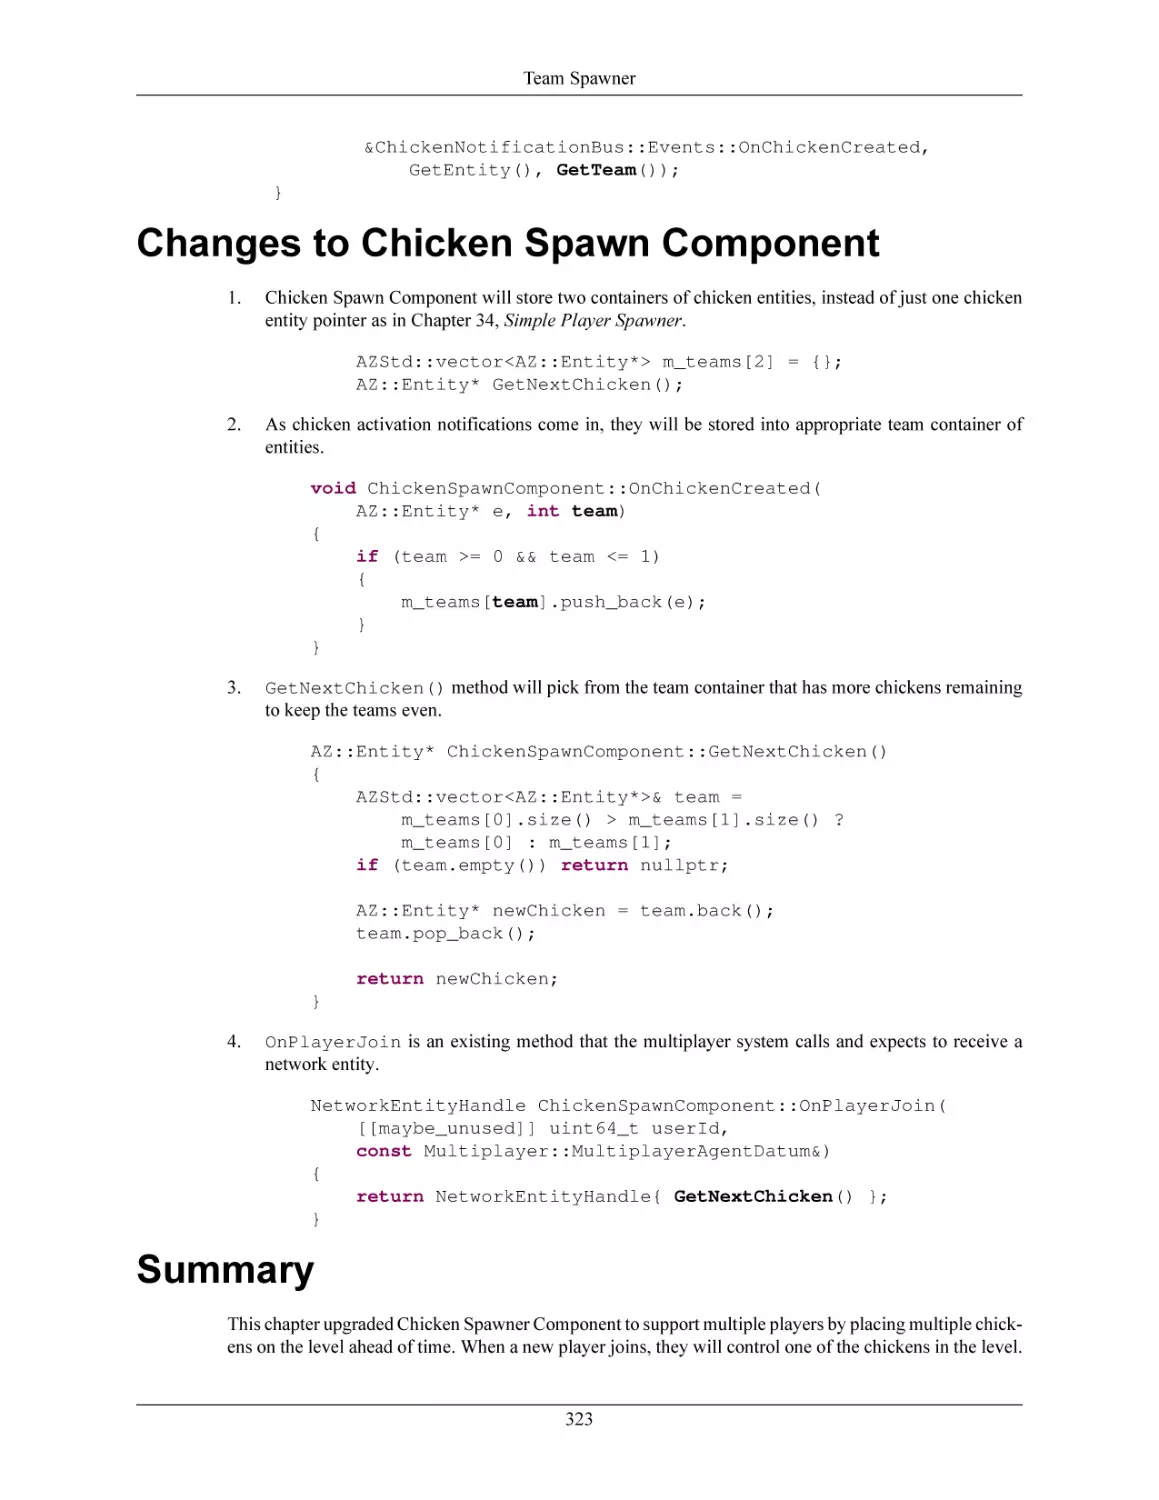 Changes to Chicken Spawn Component
Summary